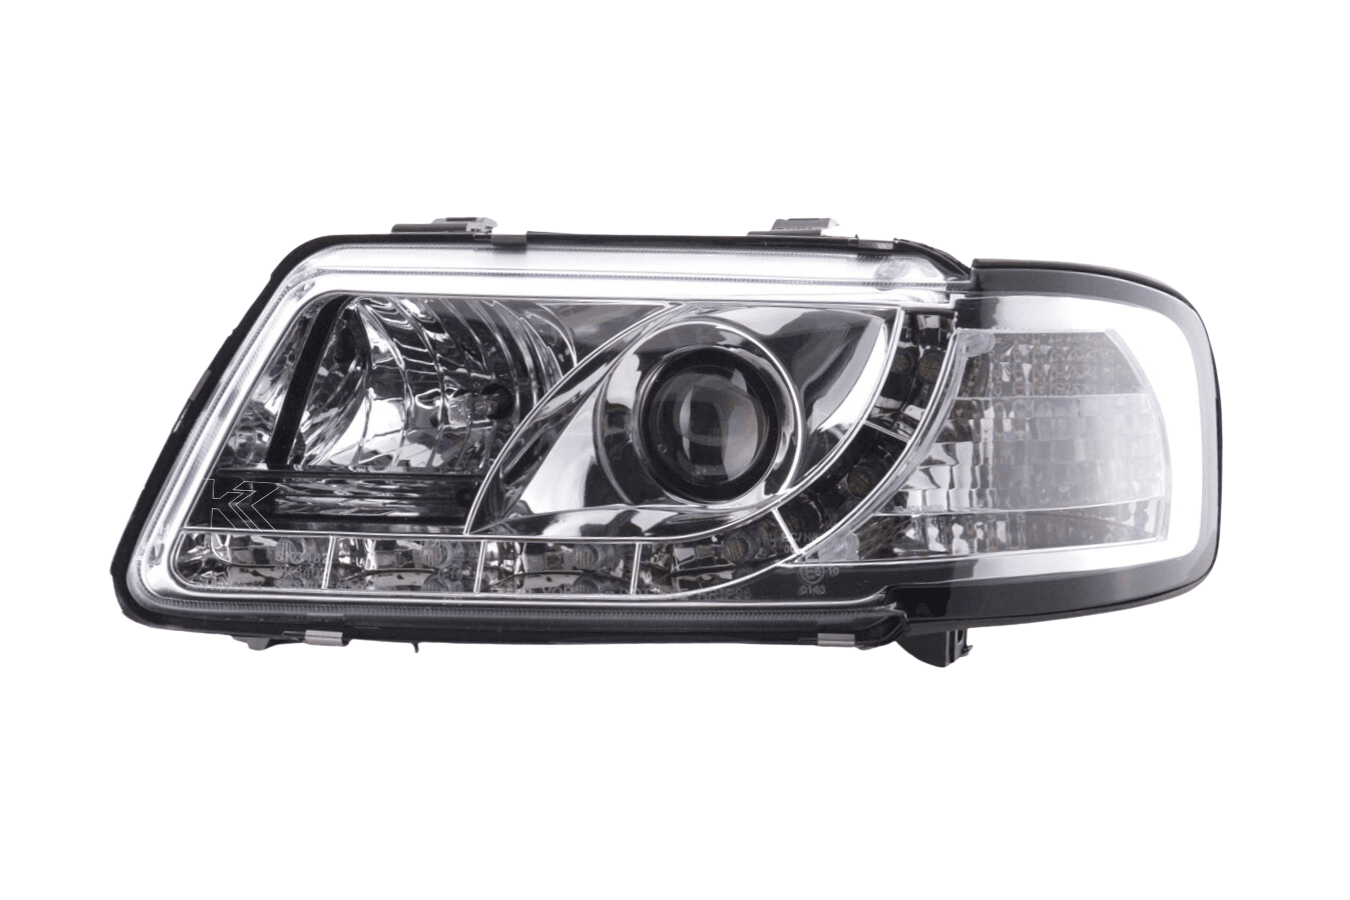 Audi A3 (8L) Chrome LED Headlights with Daytime Running Lights (1996-2000) - K2 Industries